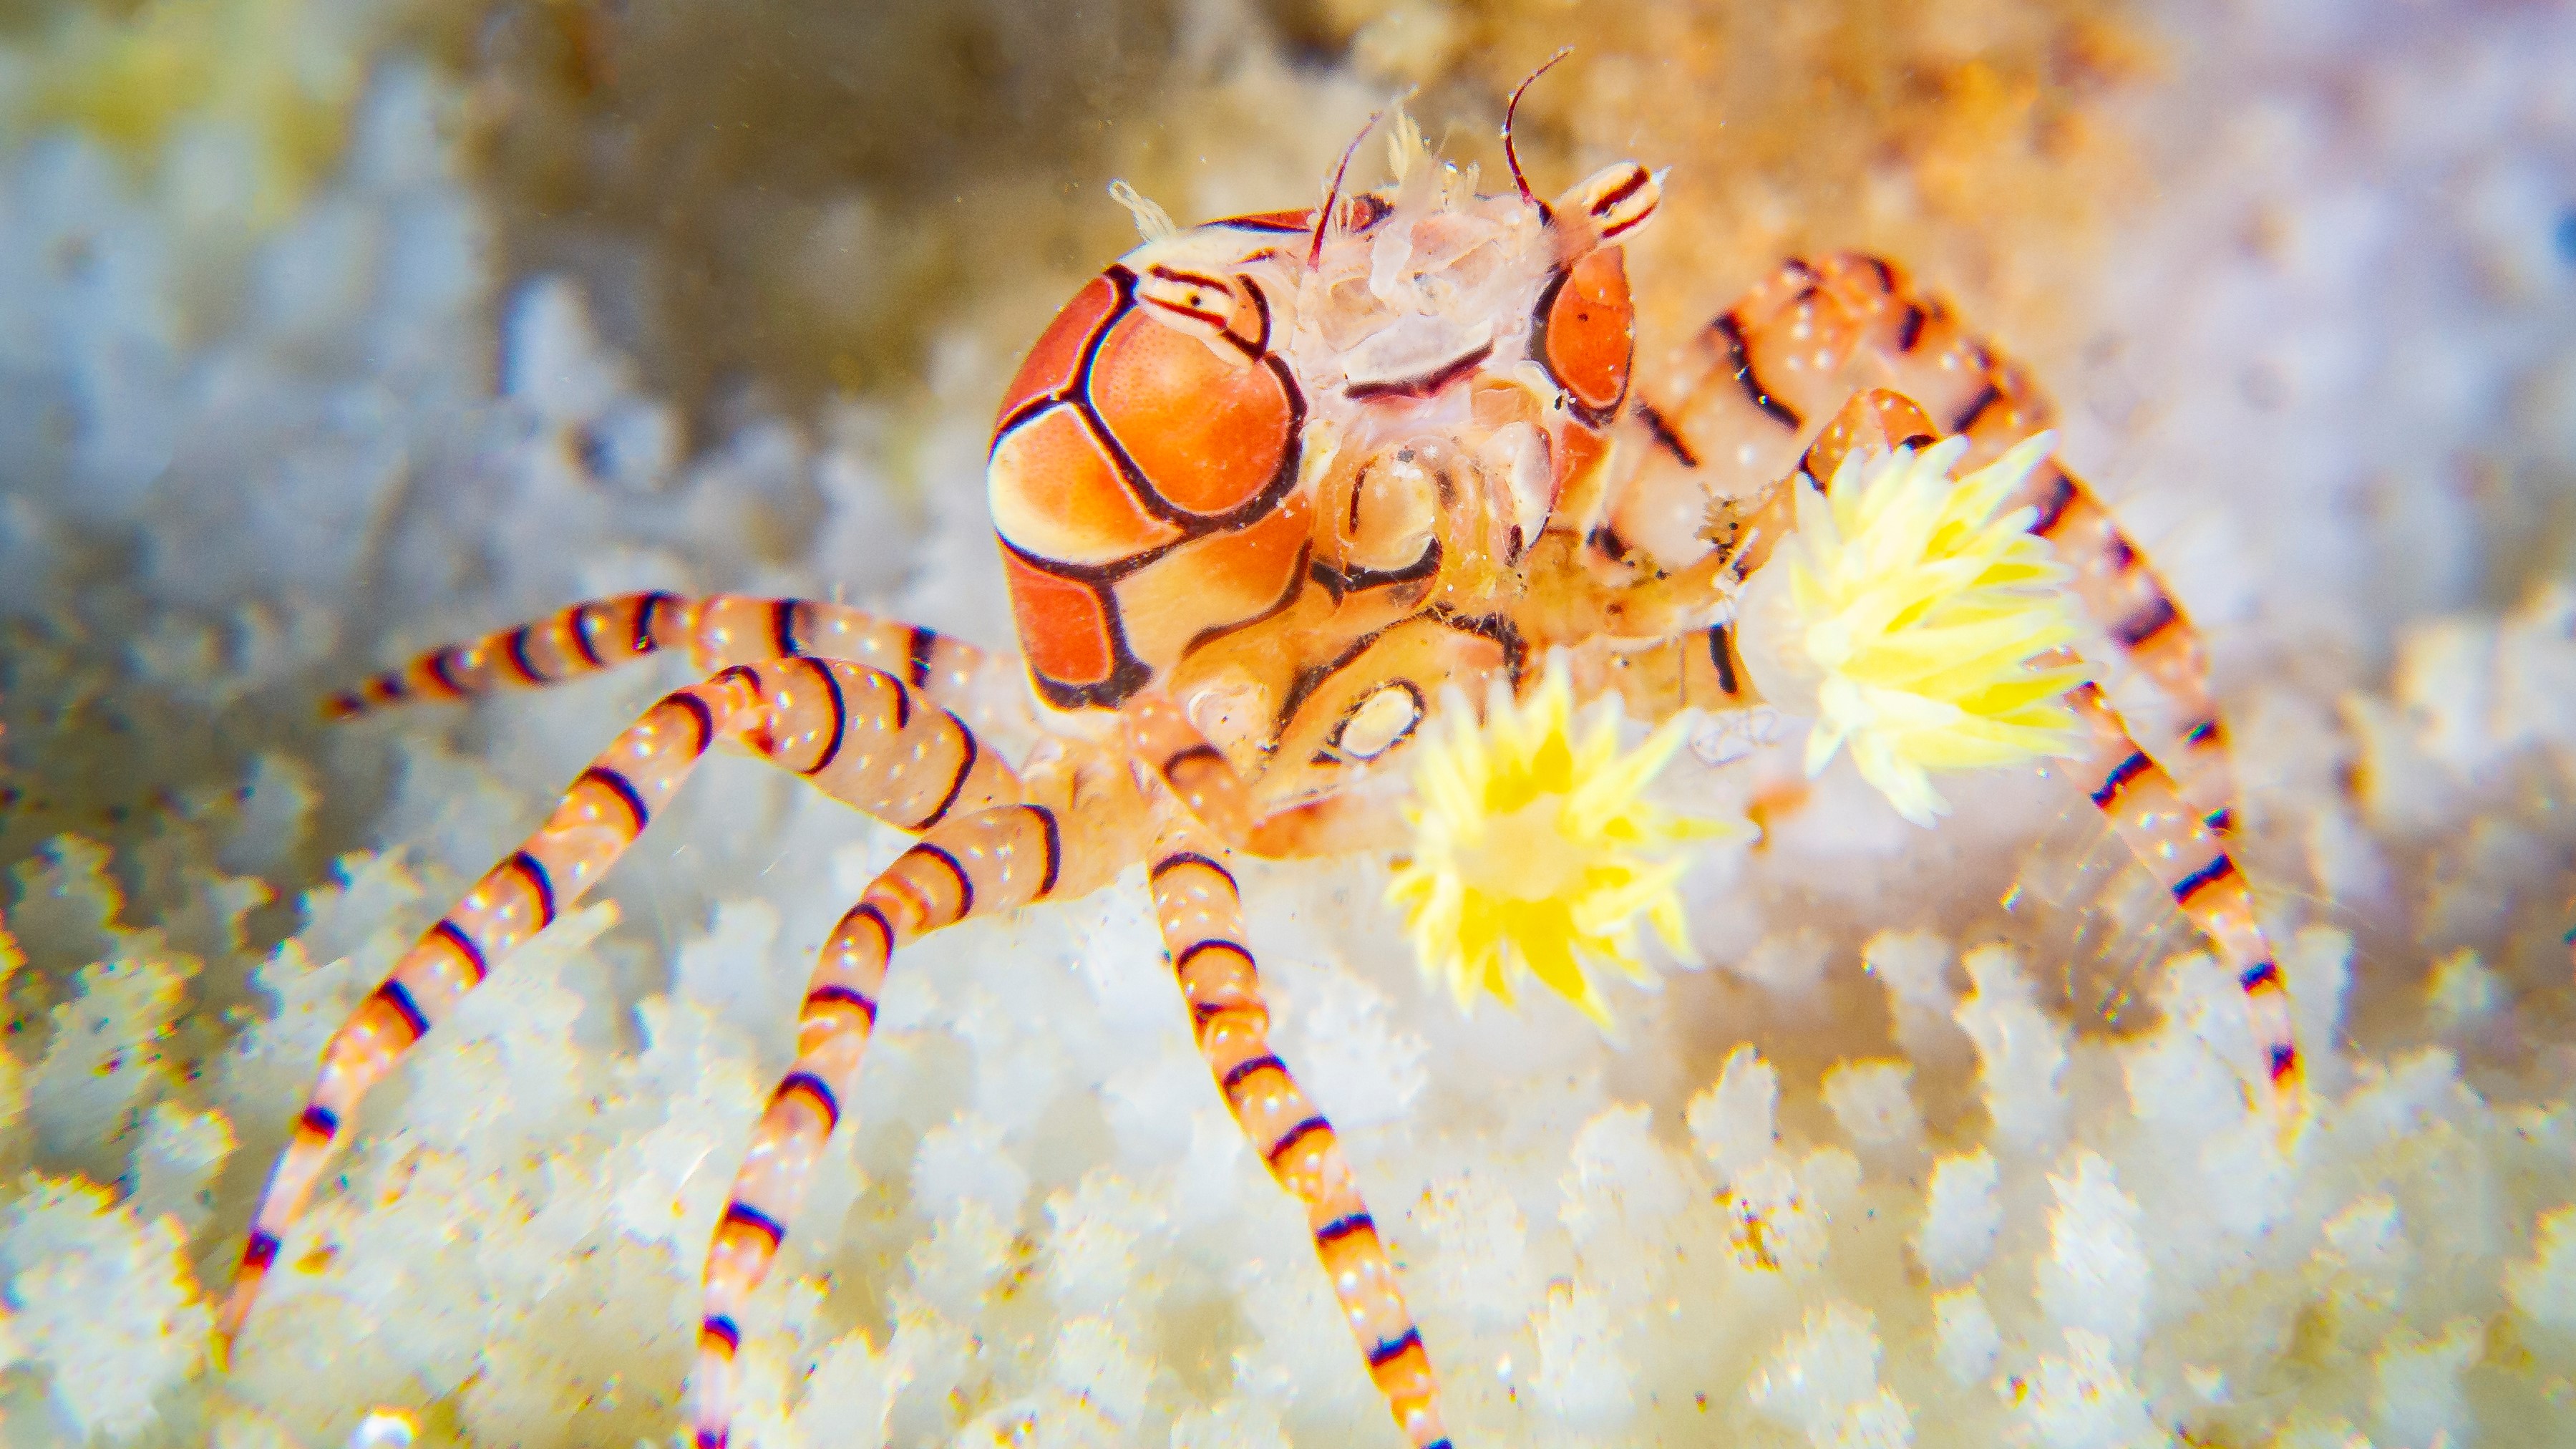 Pom pom crab: The crustacean that uses anemones as boxing gloves thumbnail